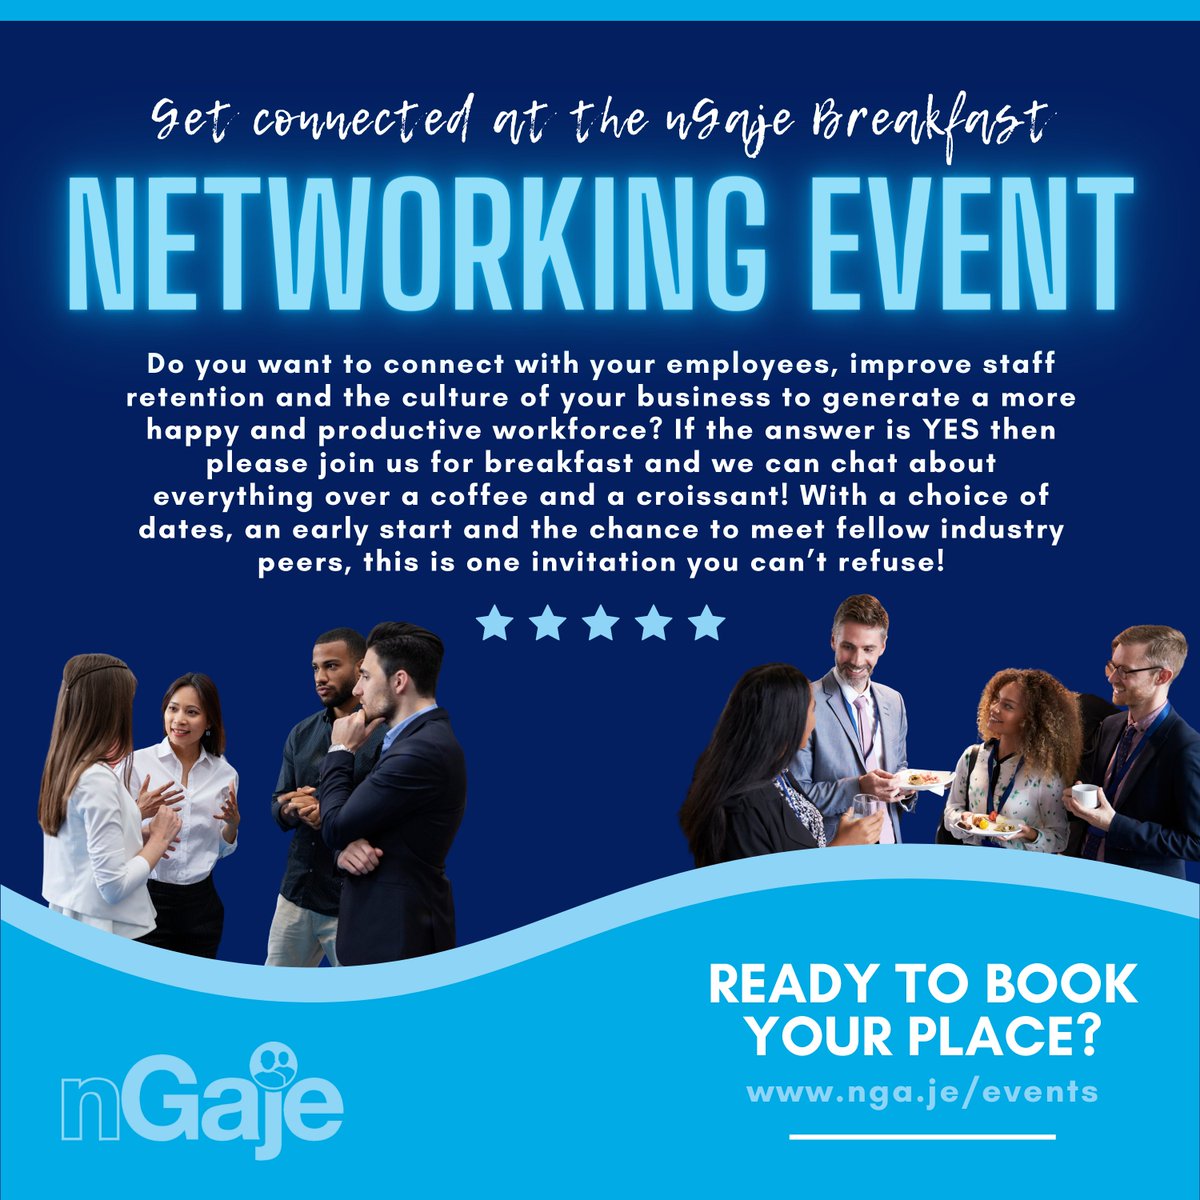 Book your place today! nga.je/events